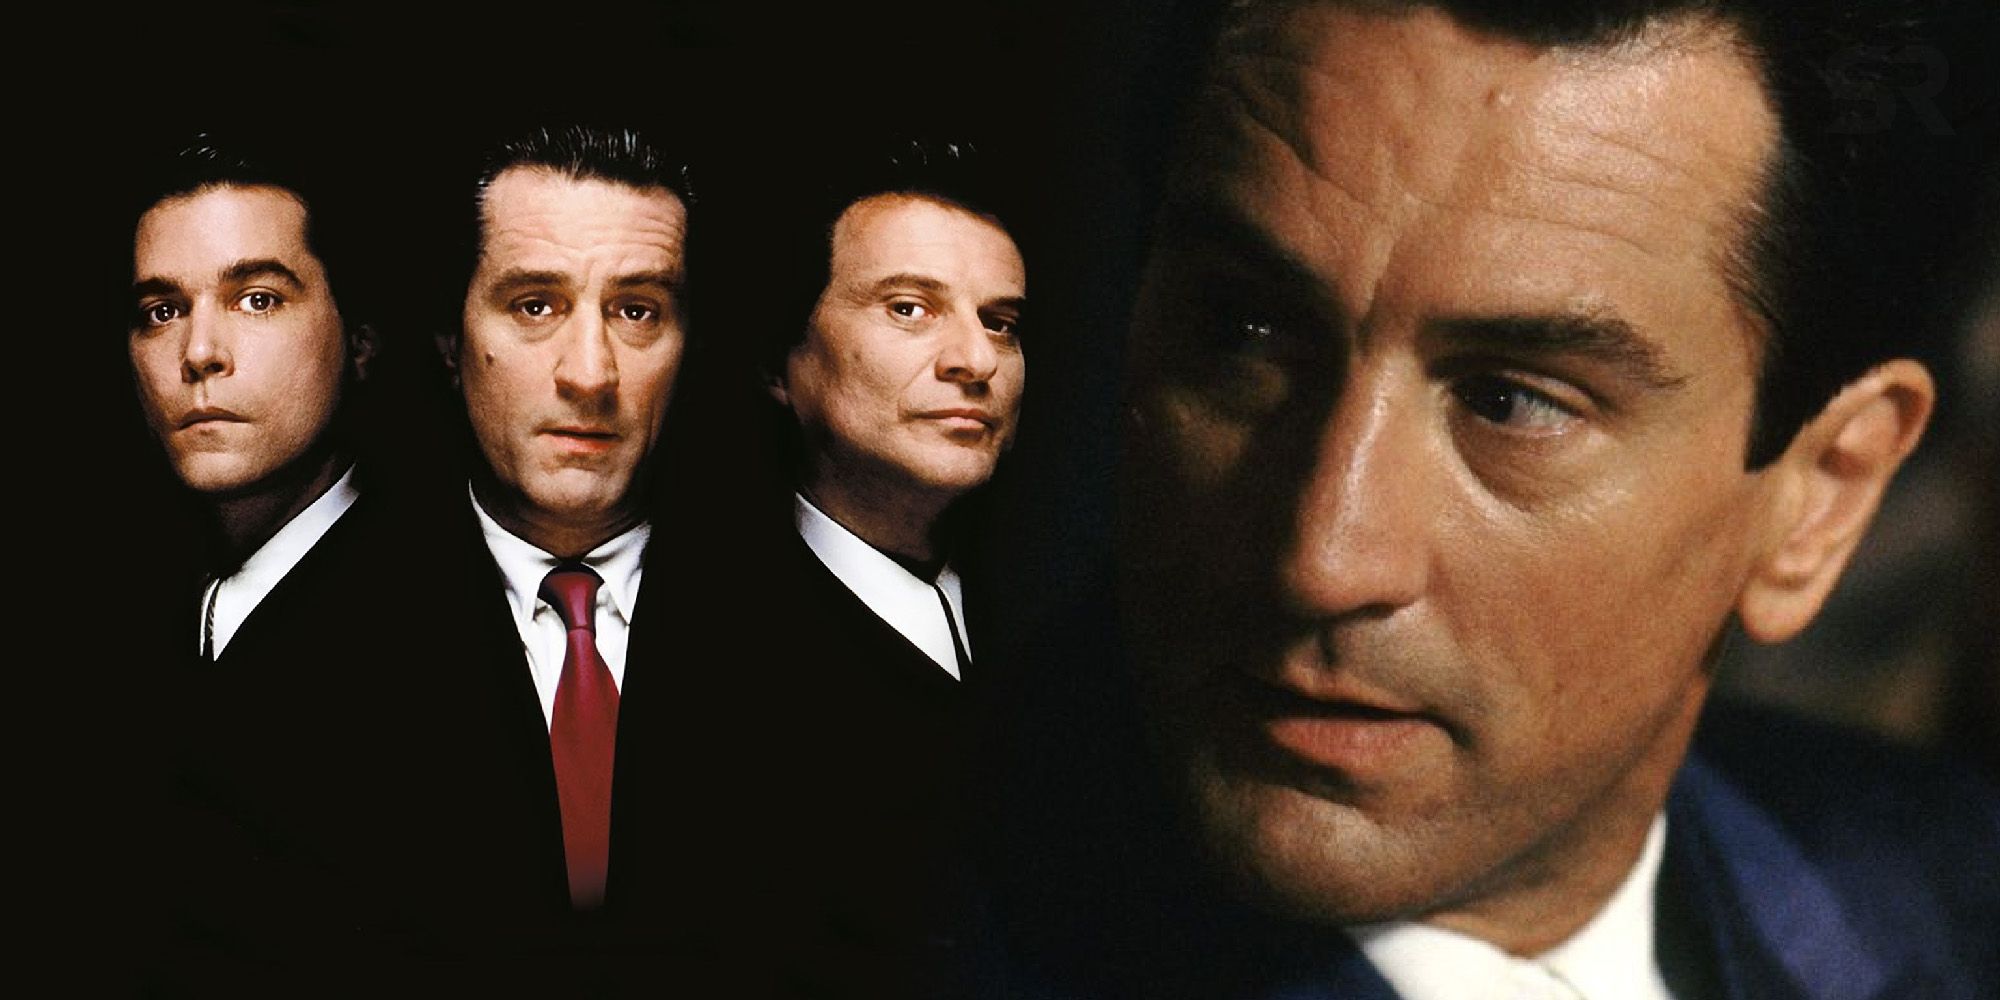 Goodfellas Jimmys 10 Best Quotes Ranked